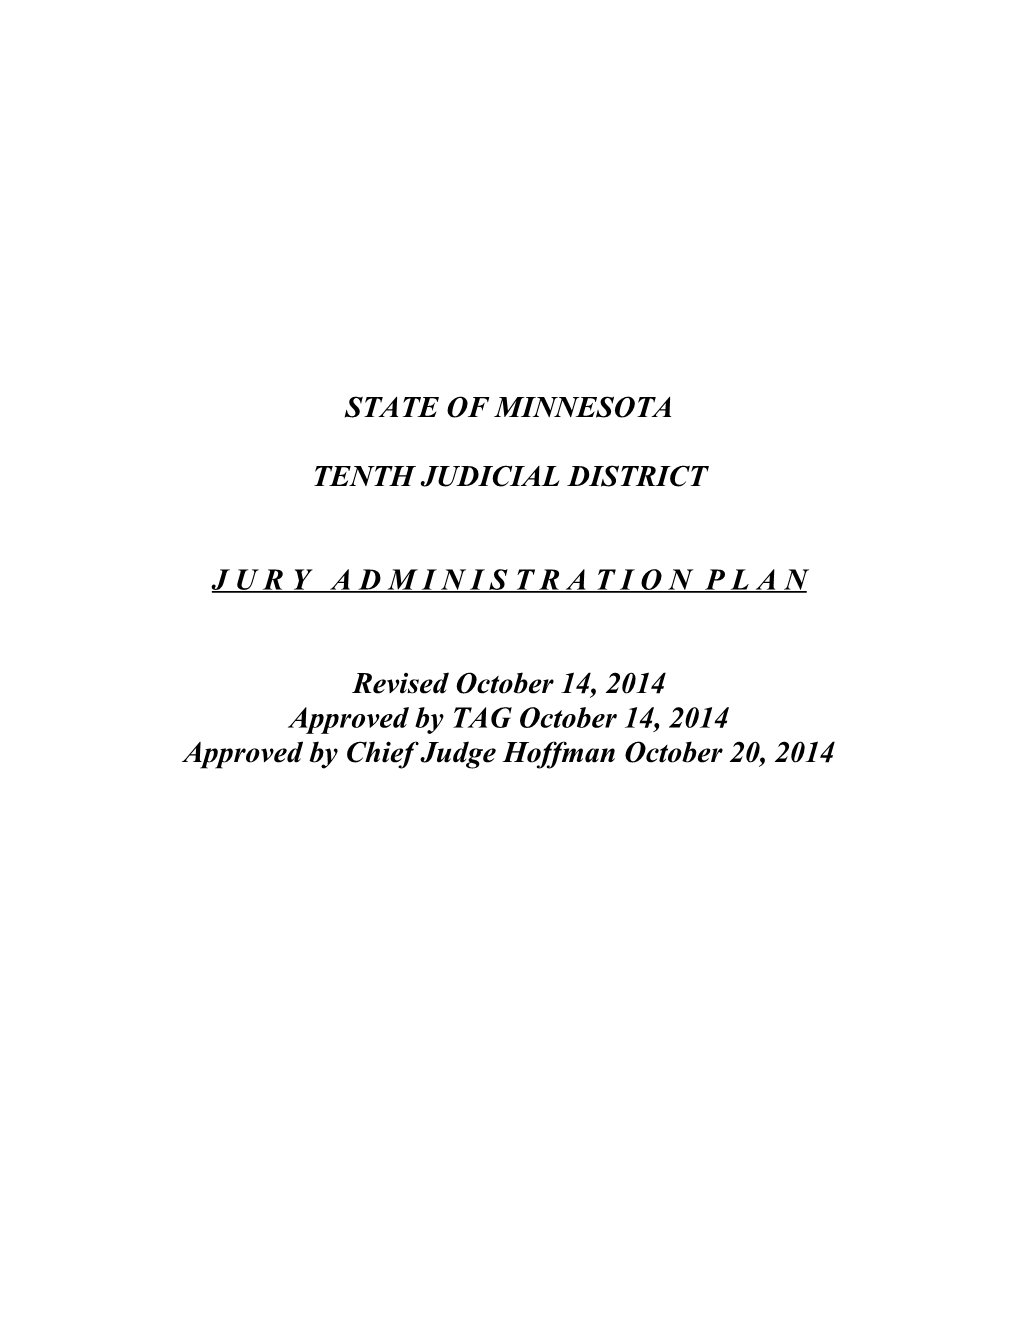 Minnesota General Rules of Practice for the District Courts